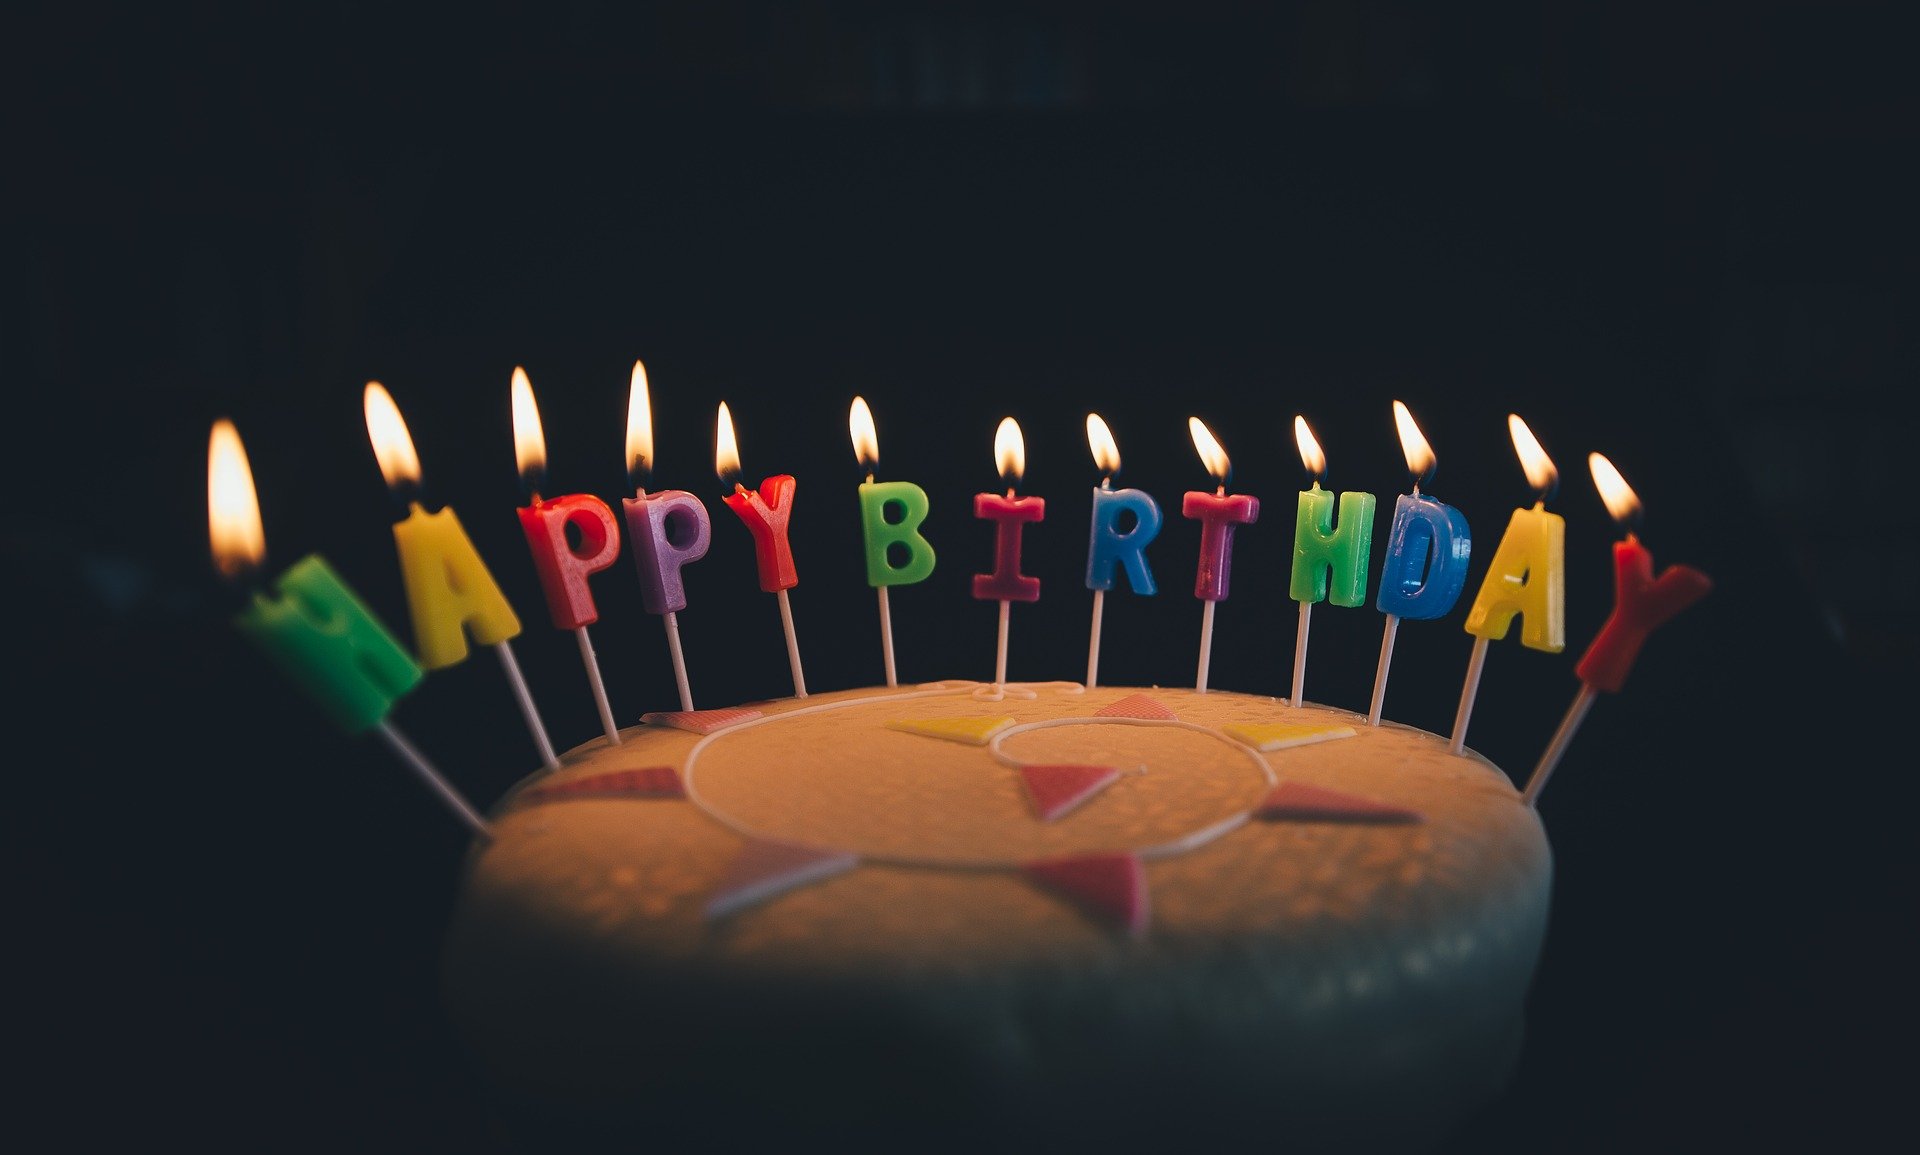 A Birthday cake with lit candles. | Photo: Pixabay.